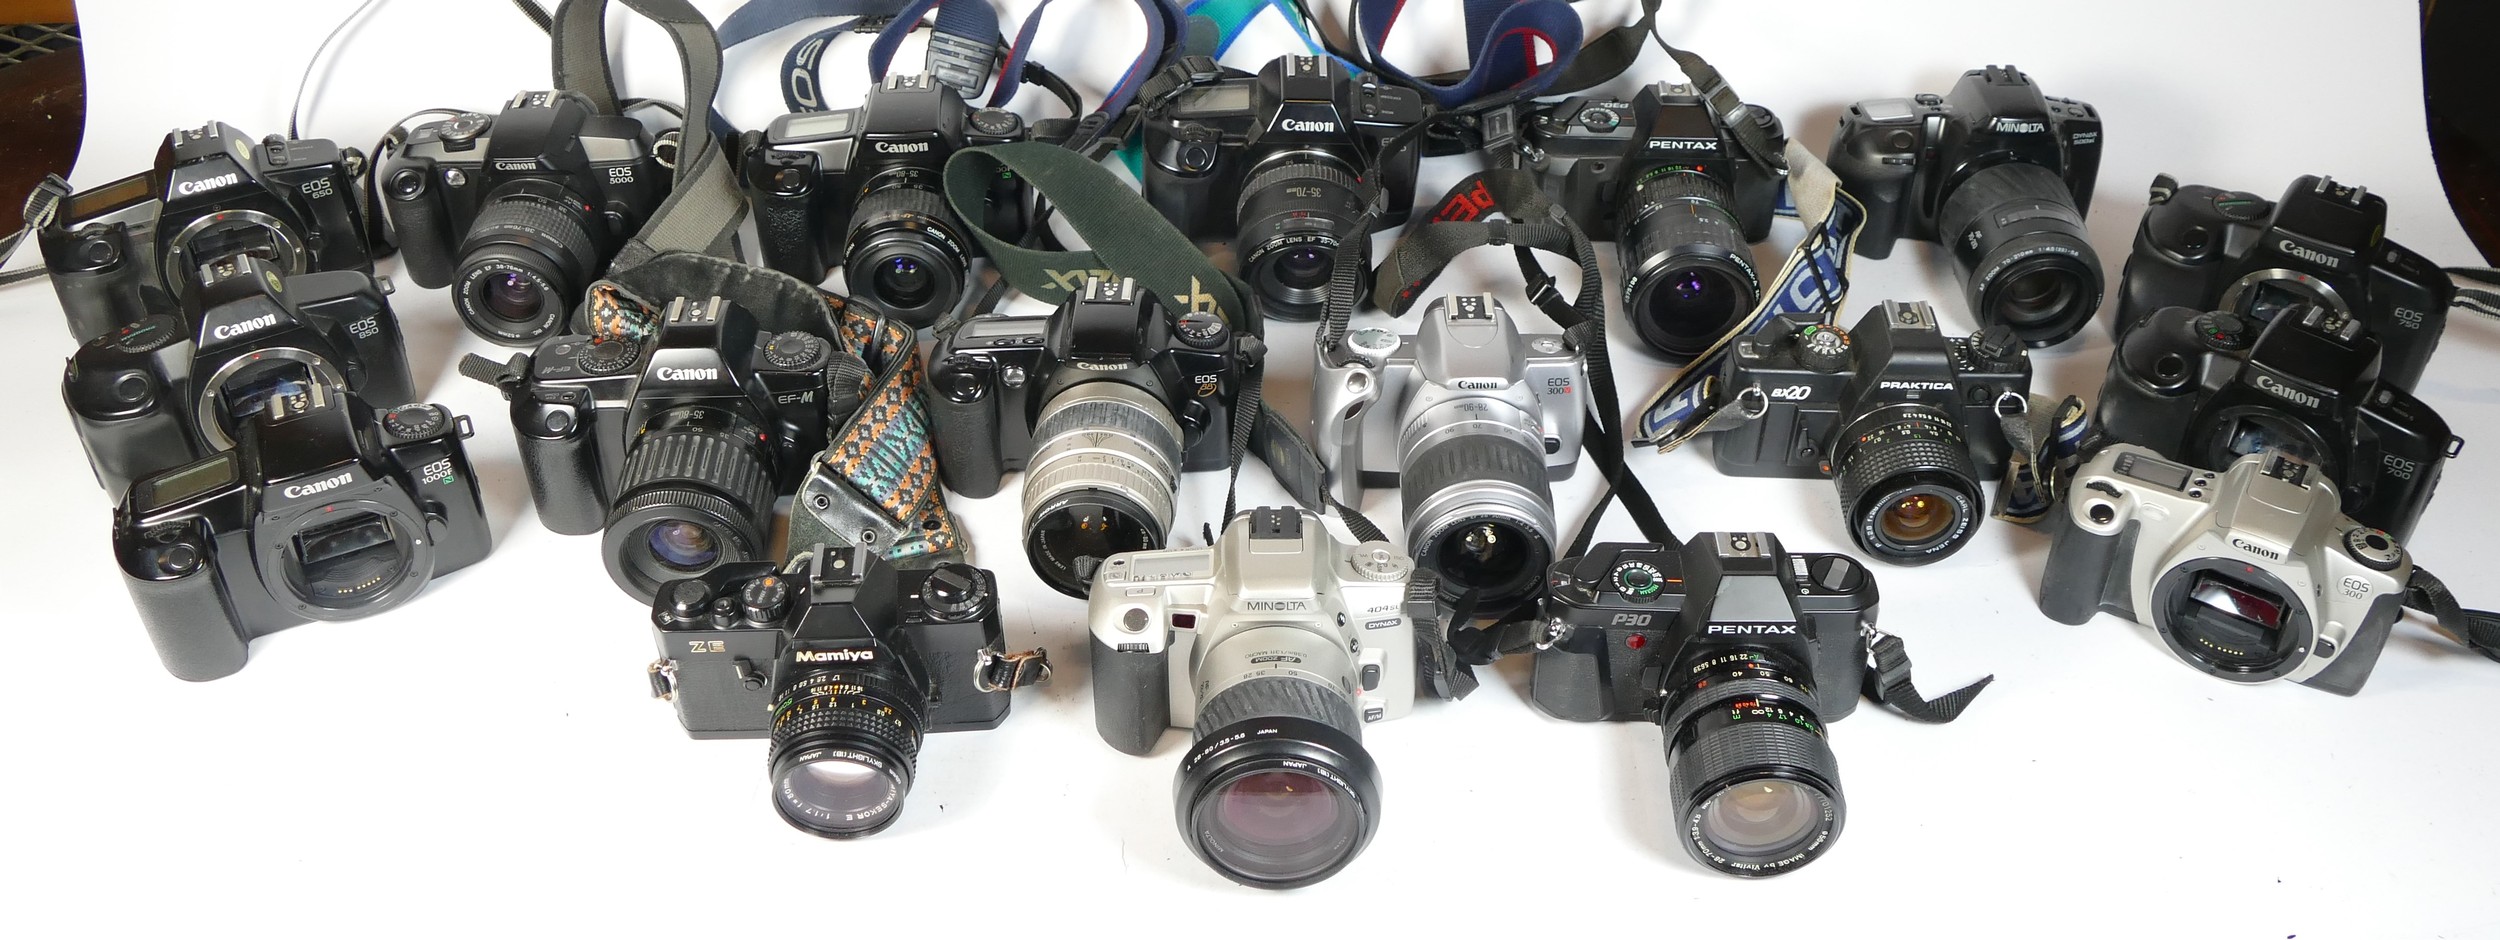 Twenty five SLR vintage film cameras to include a Pentax P30n, a Canon EOS 1000f, a Canon EOS 300